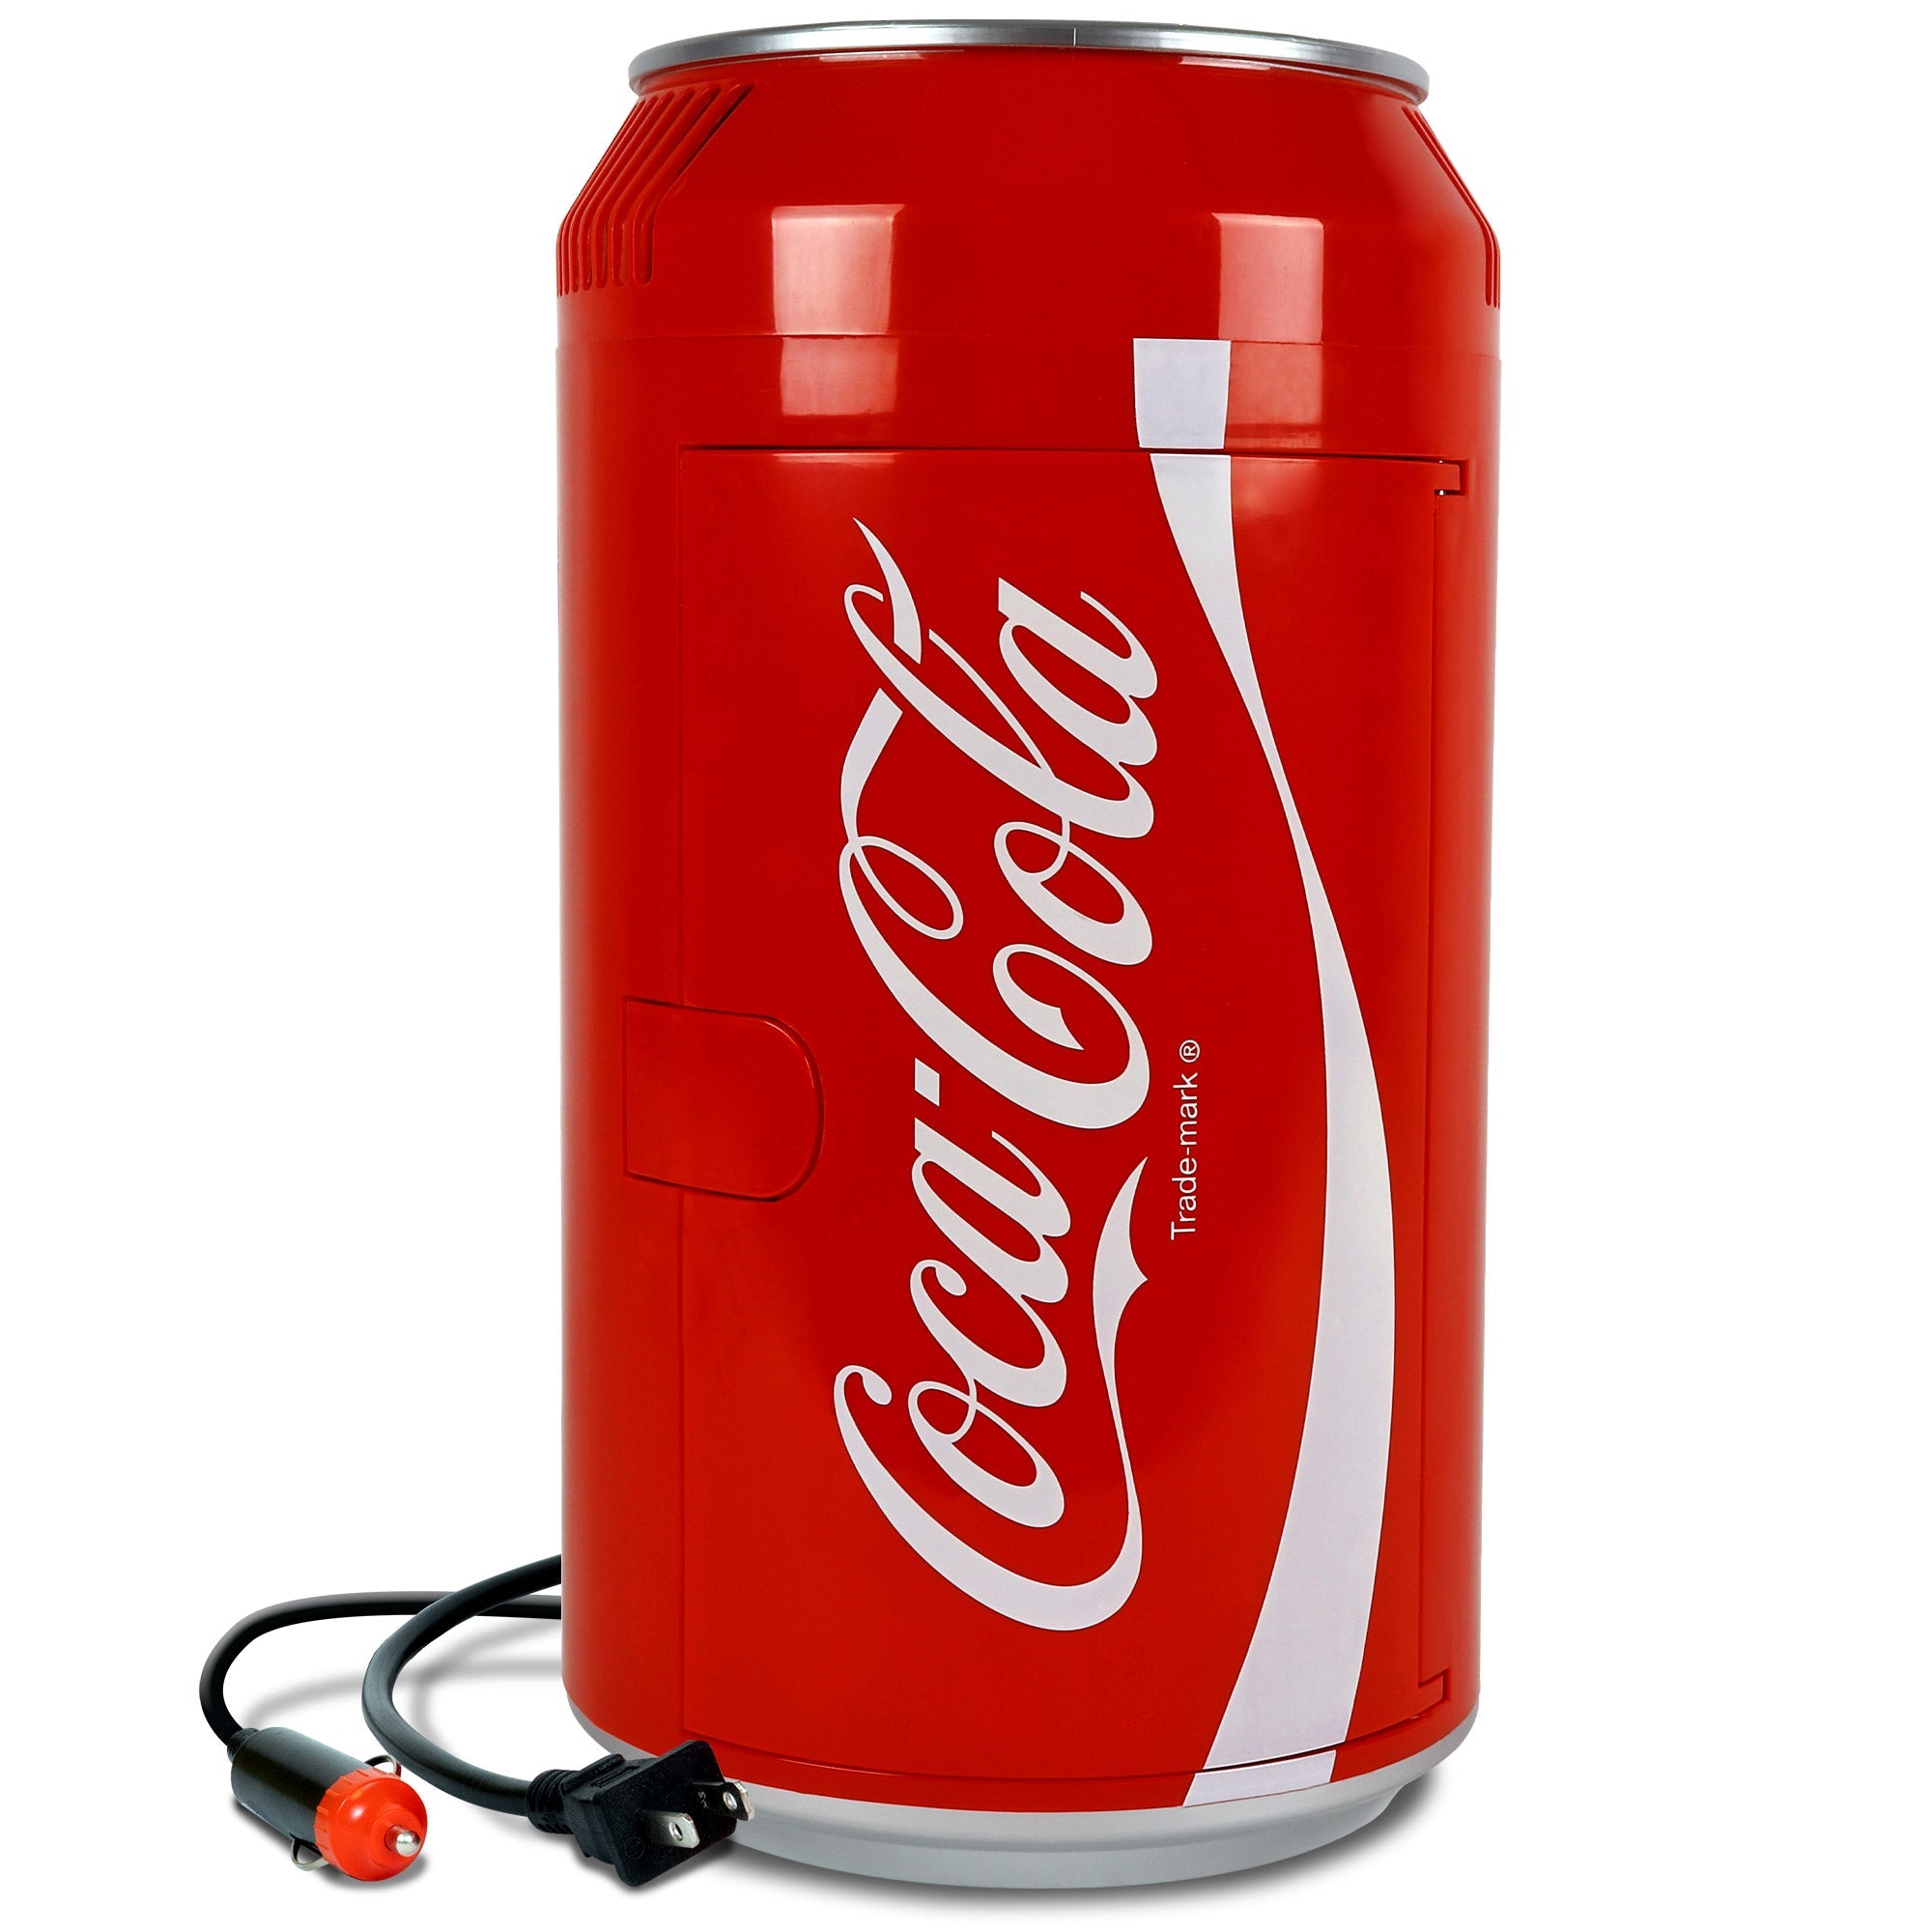 Product shot of Coca-Cola can-shaped 12 can mini fridge, closed, on a white background with AC and DC power cords visible